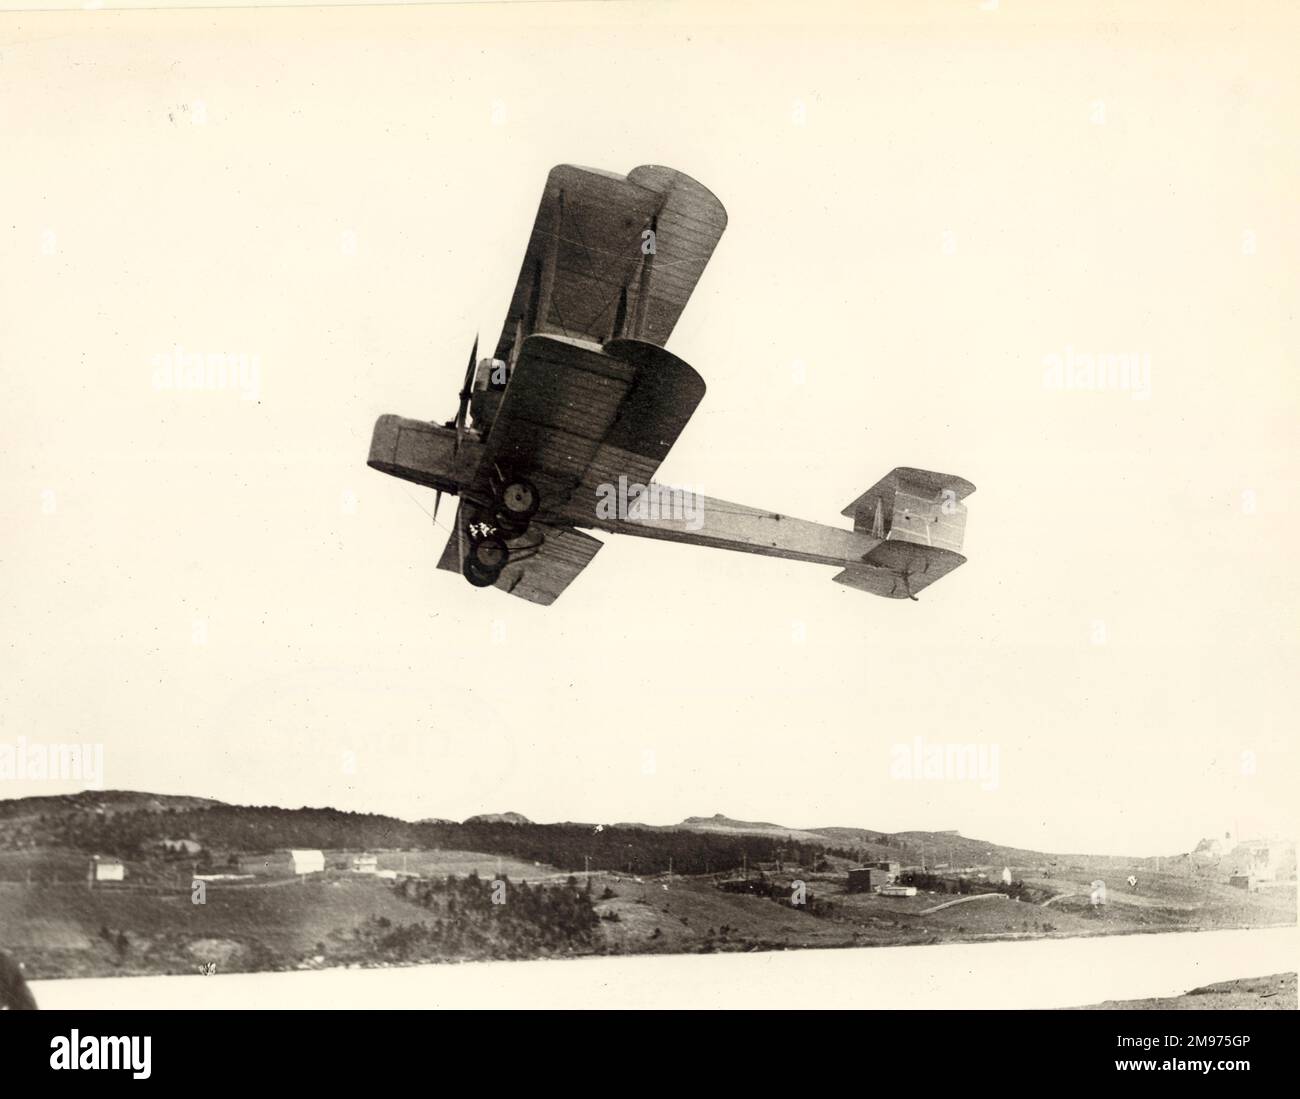 Take-off from Newfoundland of Alcock and Brown’s Vickers Vimy for the first direct Atlantic flight, 14 June 1919. Stock Photo